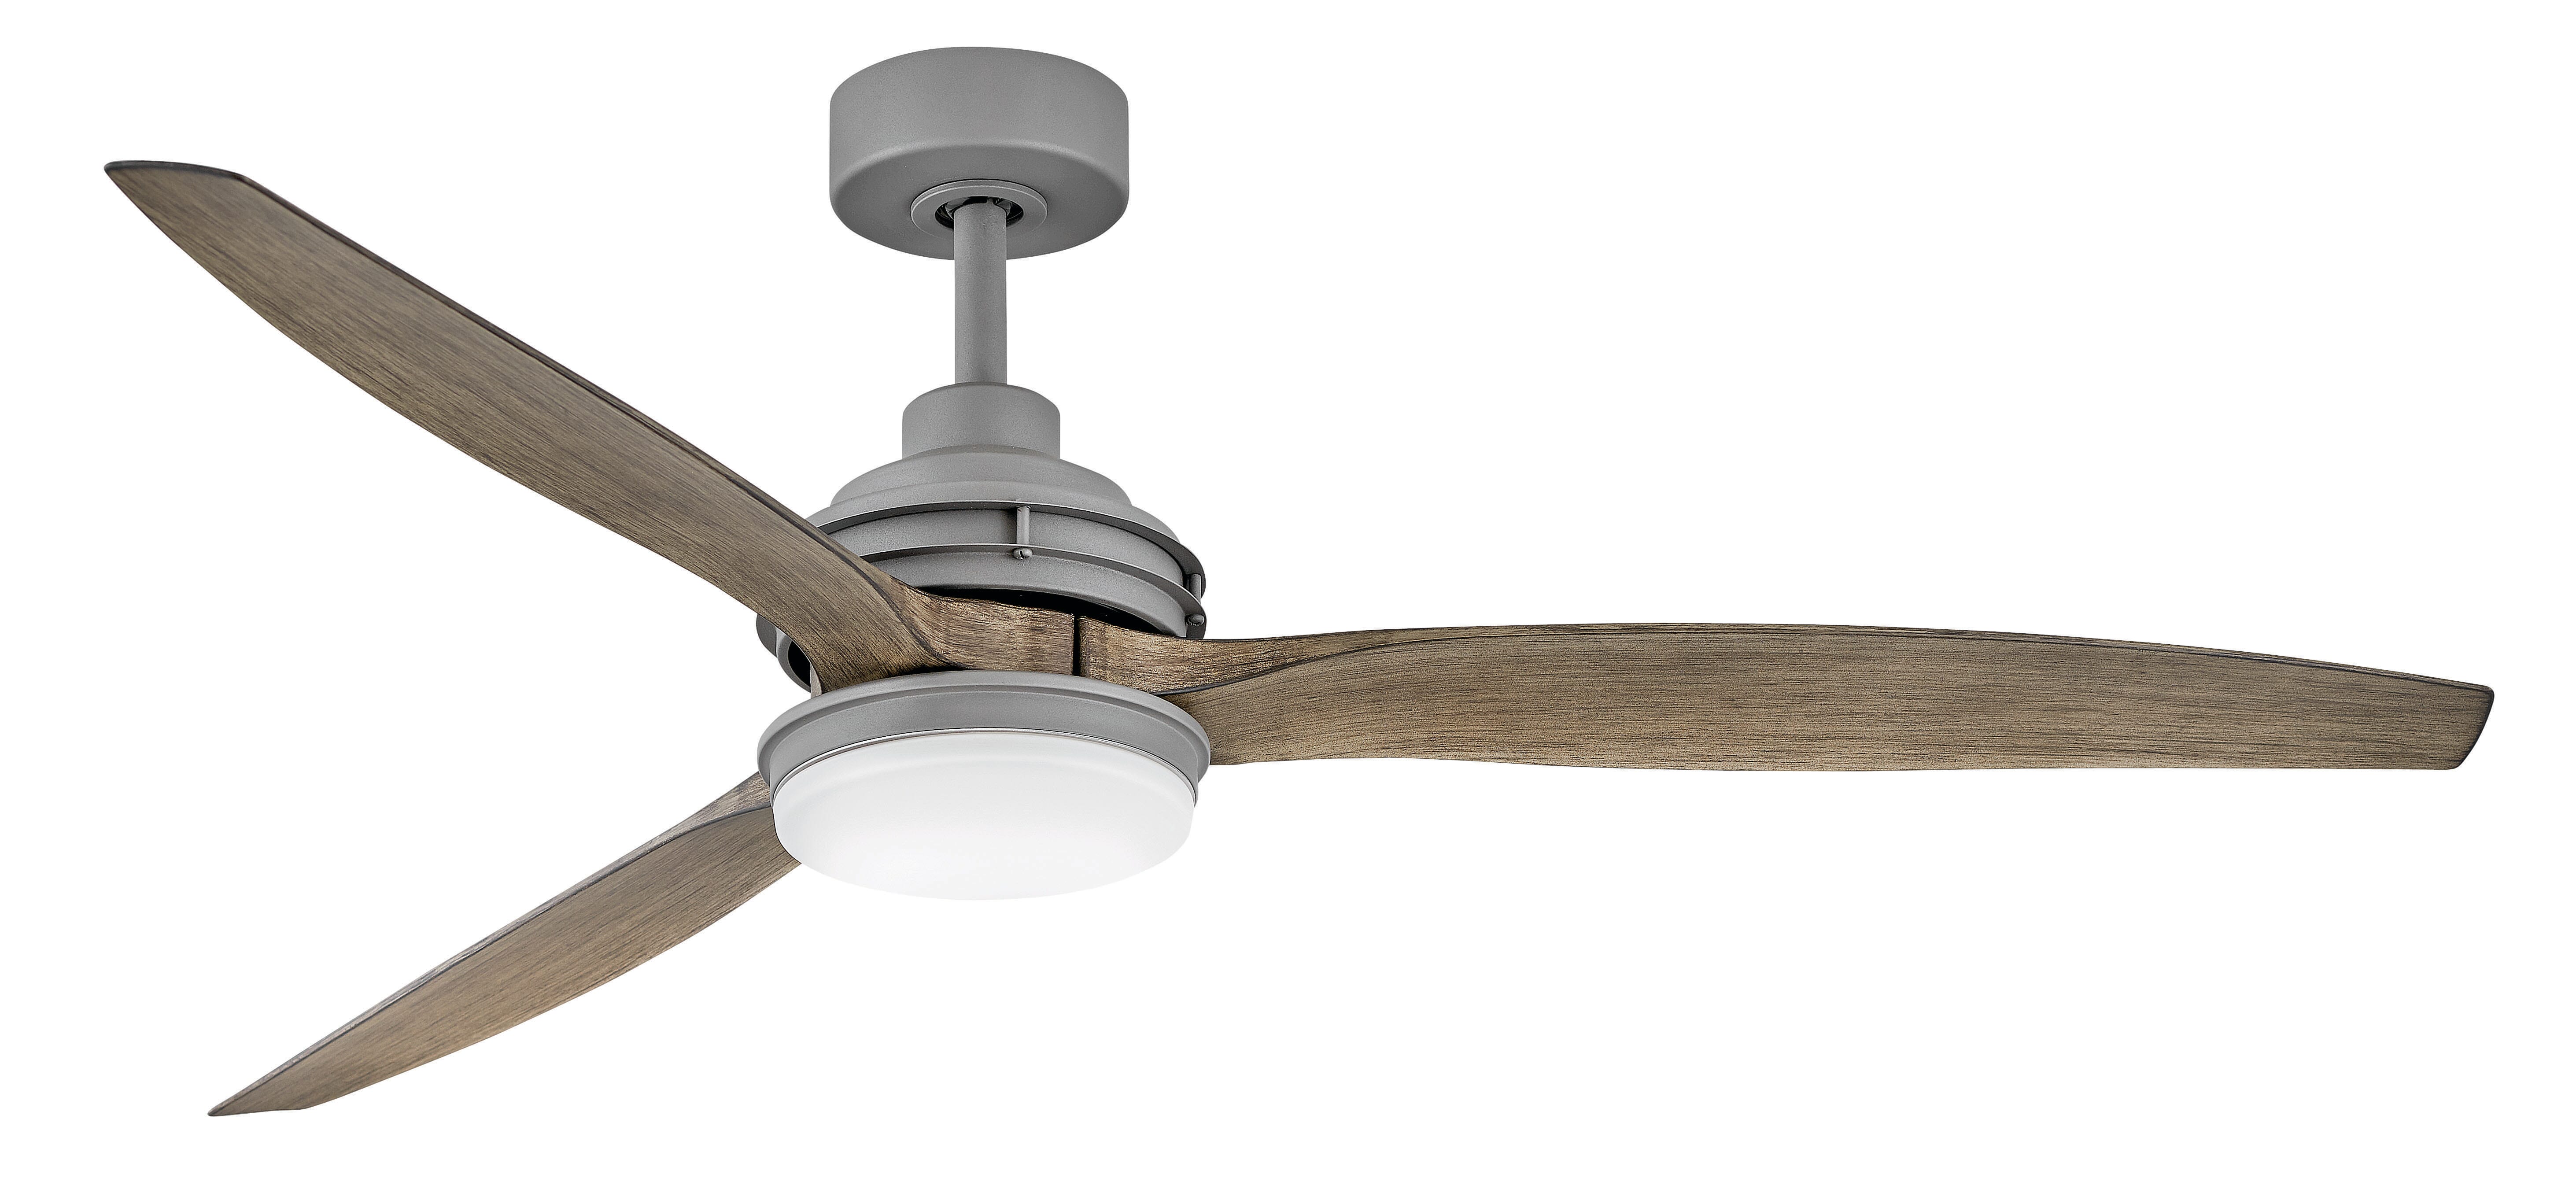 Hinkley Artiste LED 60" Indoor/Outdoor Ceiling Fan in Graphite - 900160FGT-LWD